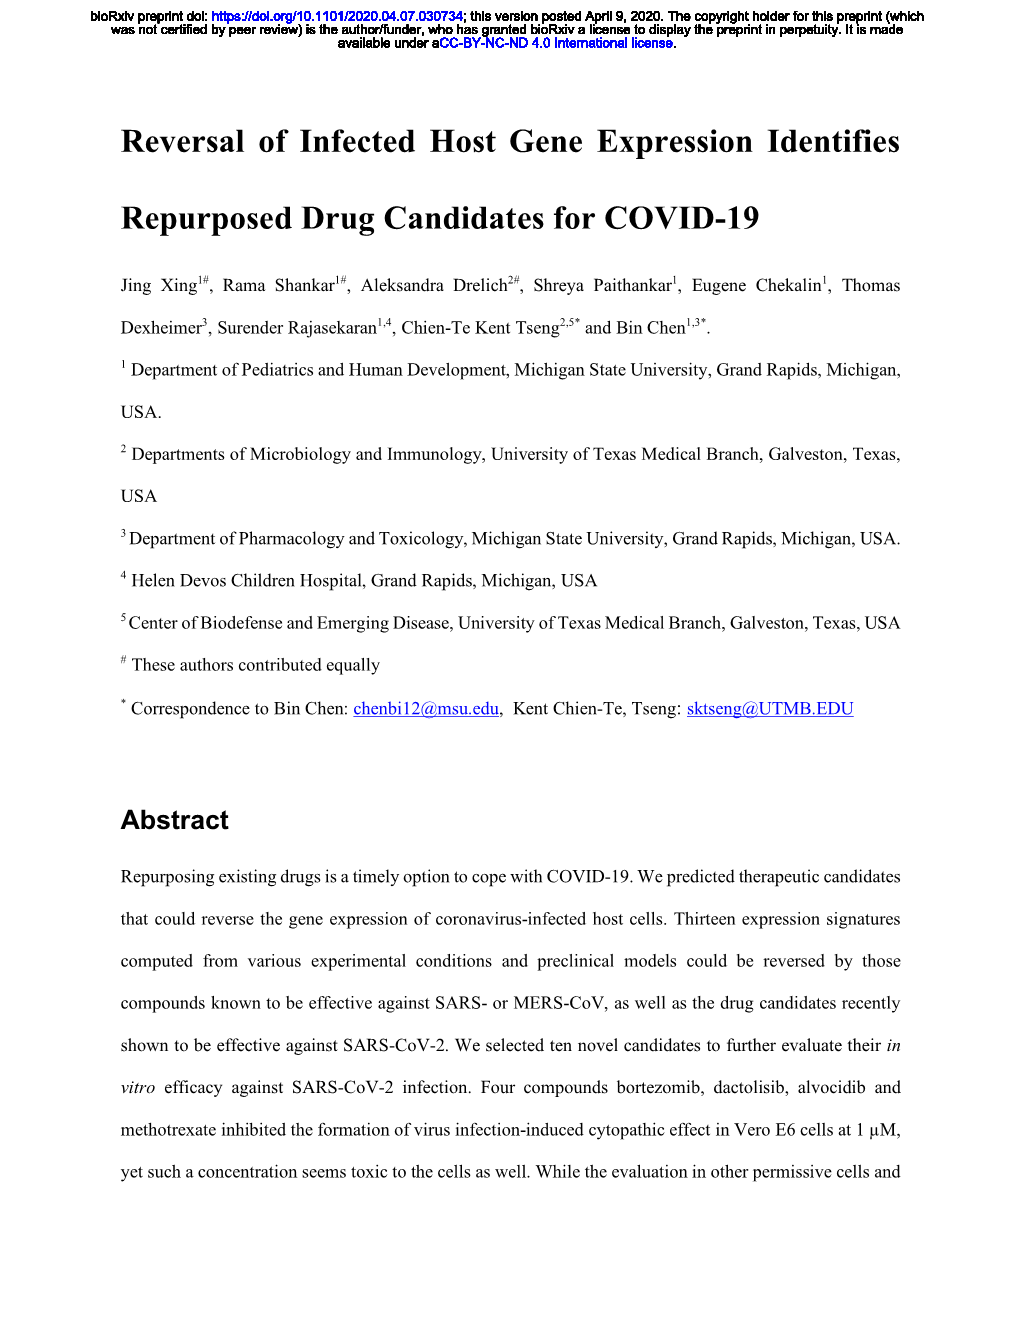 Reversal of Infected Host Gene Expression Identifies Repurposed Drug Candidates for COVID-19